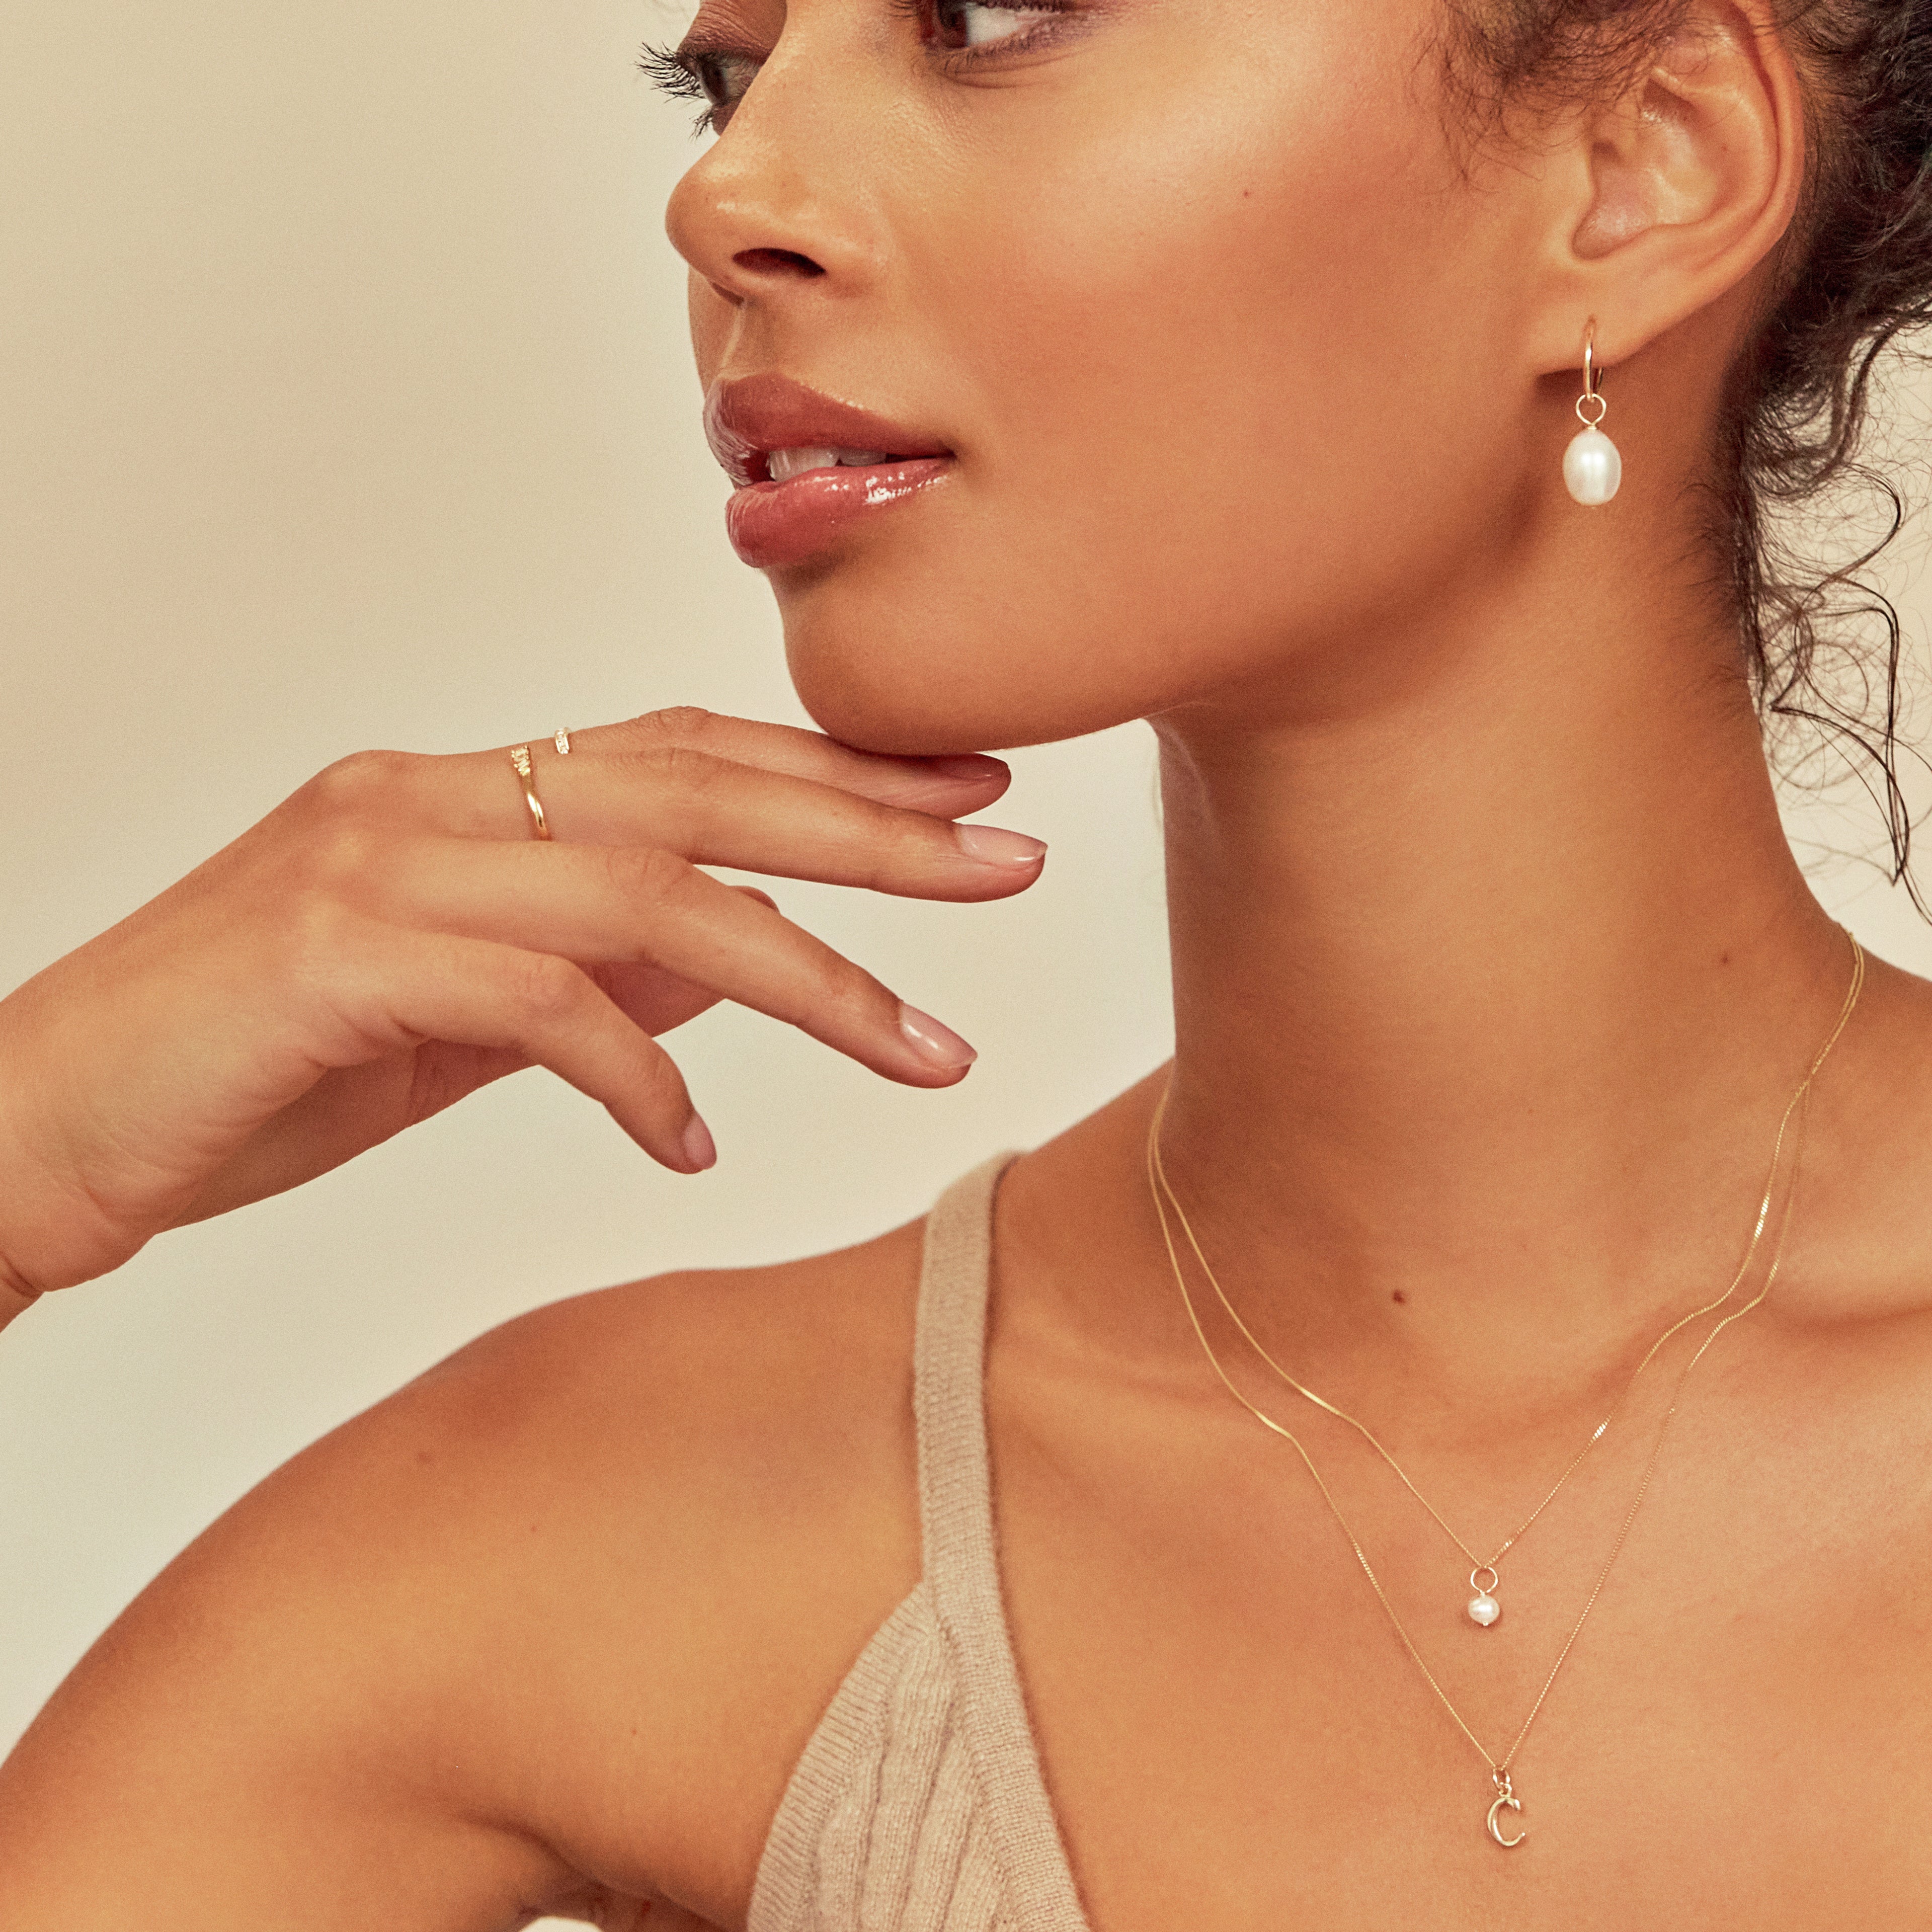 Gold single pearl necklace layered with a gold initial charm necklace 'C' around the neck of a woman  also wearing gold large pearl drop earrings in her ears and a brown knitted strappy top